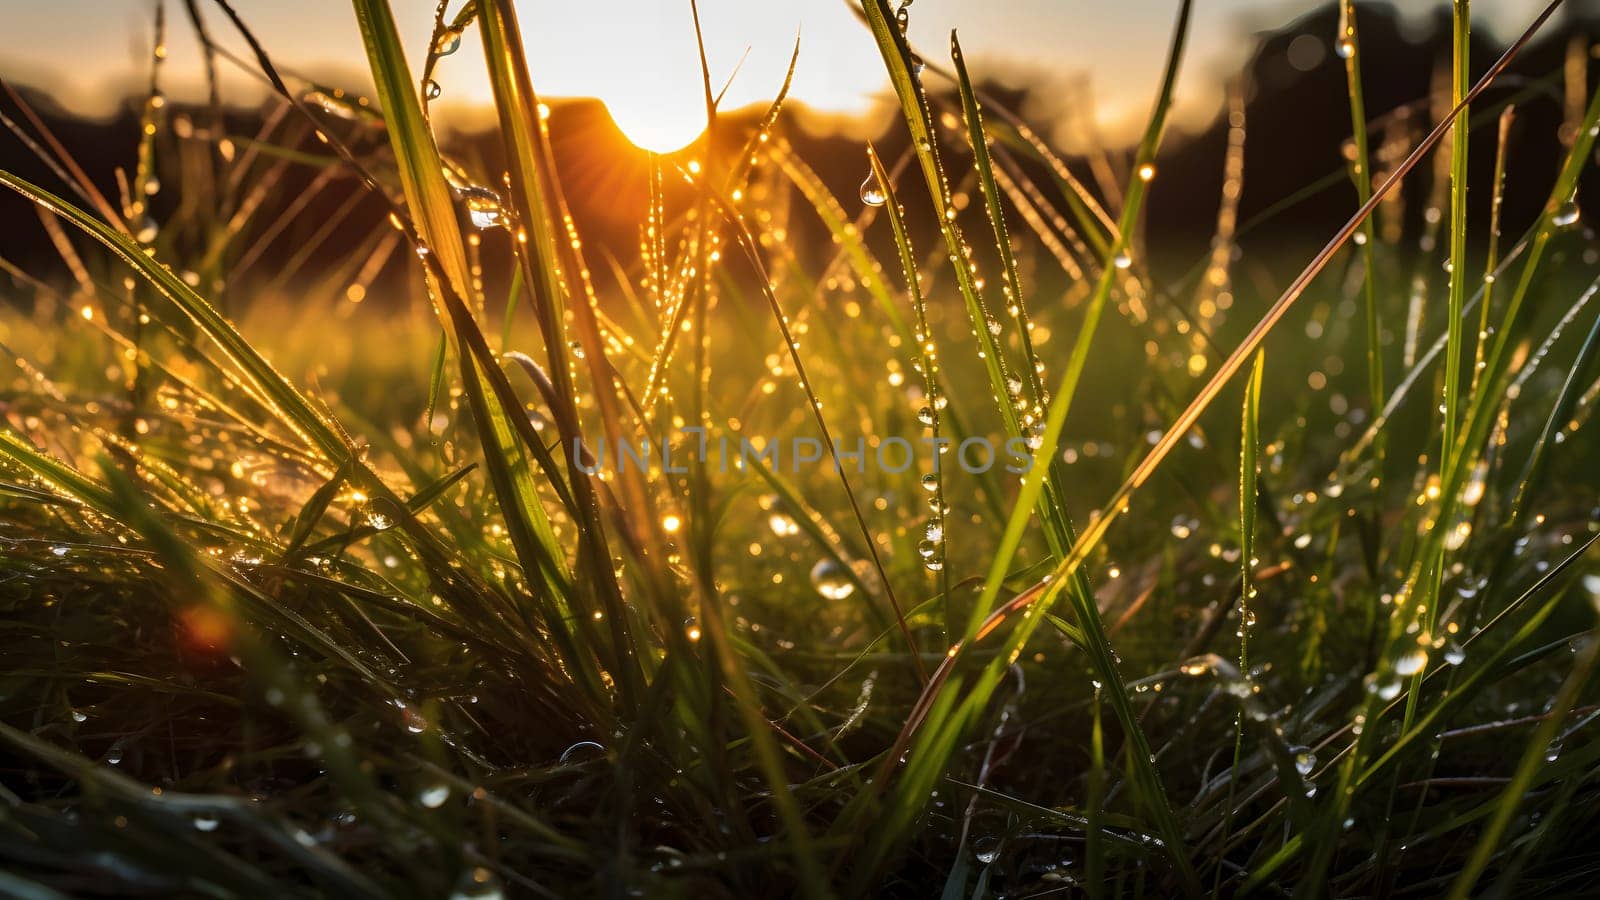 dew drops on morning grass at summer sunrise in the wild meadow, neural network generated photorealistic image by z1b